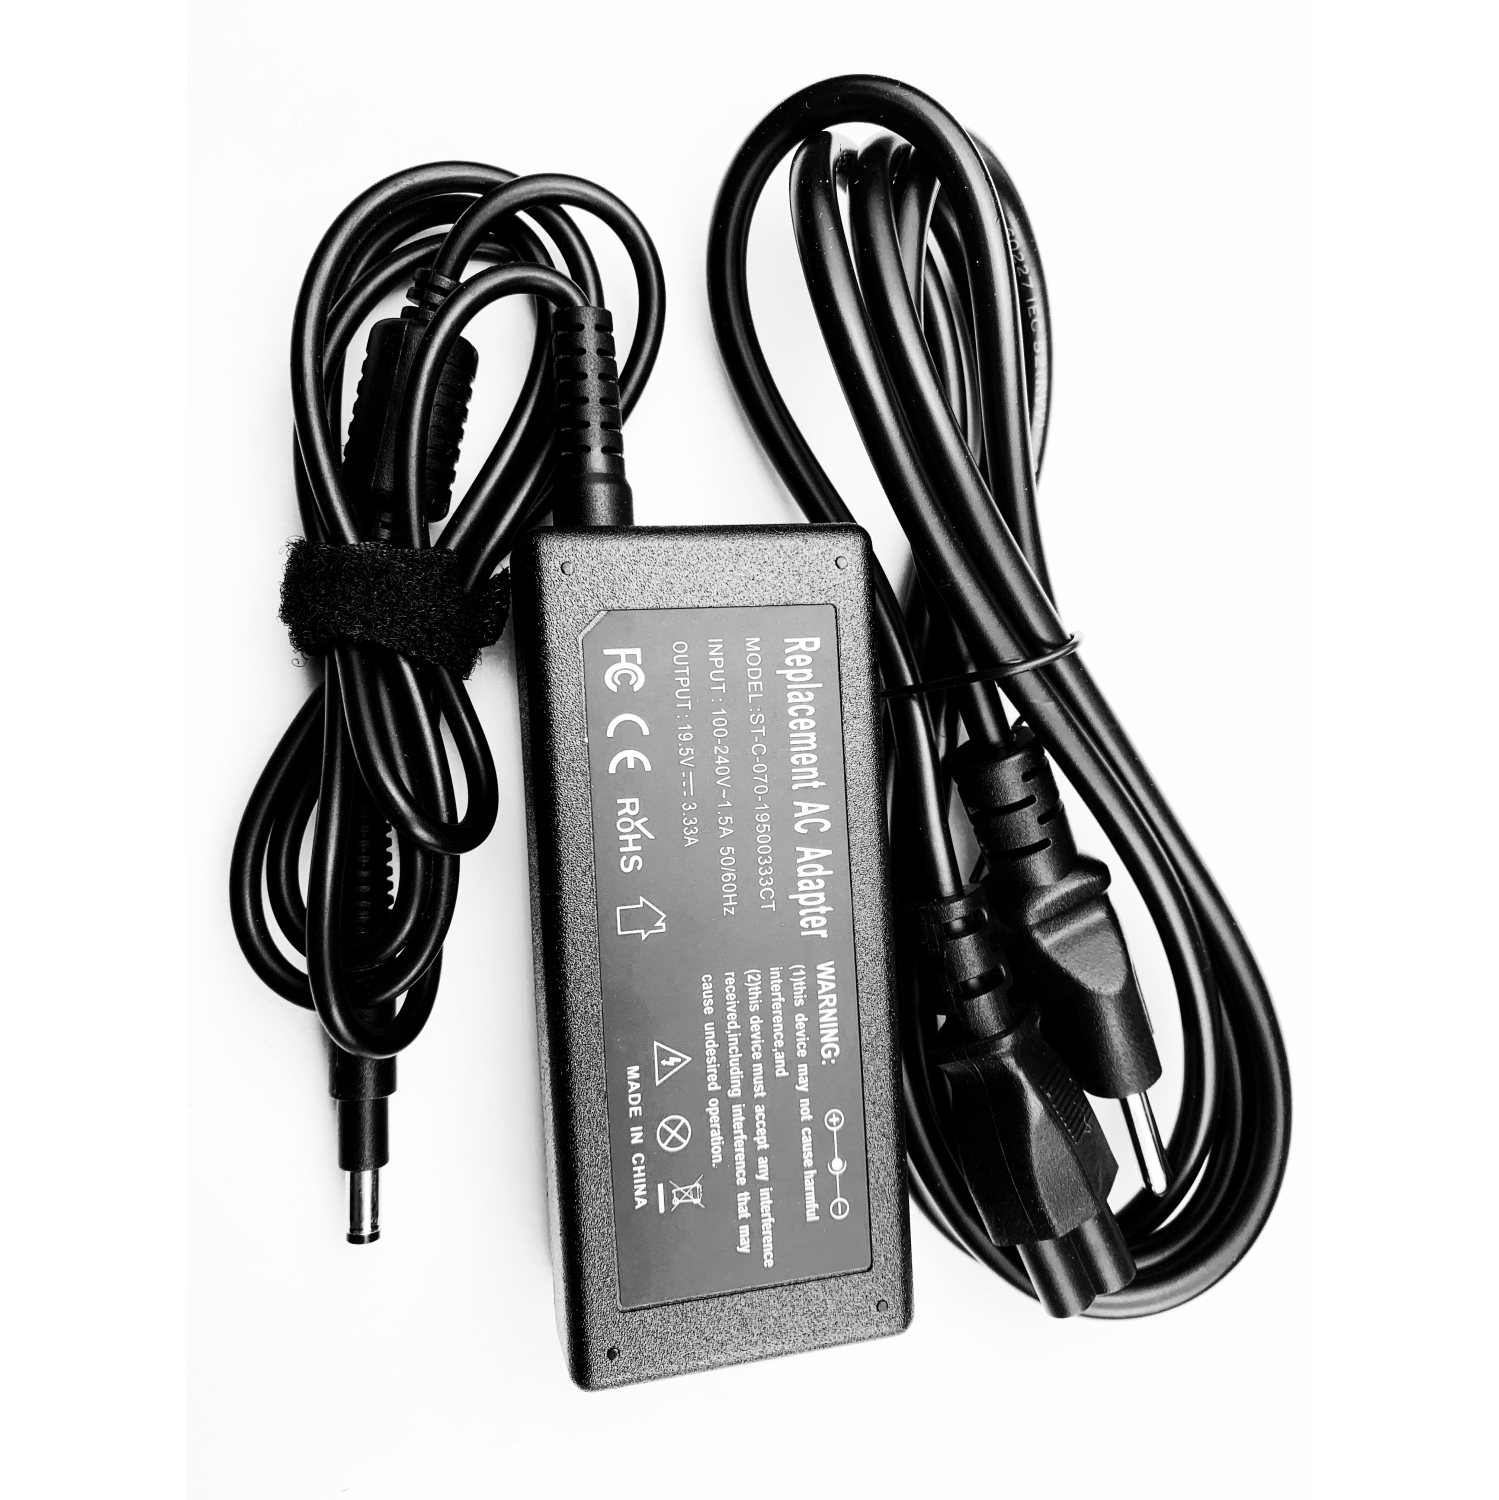 19.5V 65W 4.75mm x 1.7mm new AC adapter power cord charger for HP TouchSmart Sleekbook 6-1017cl 6-1100 6-1110us